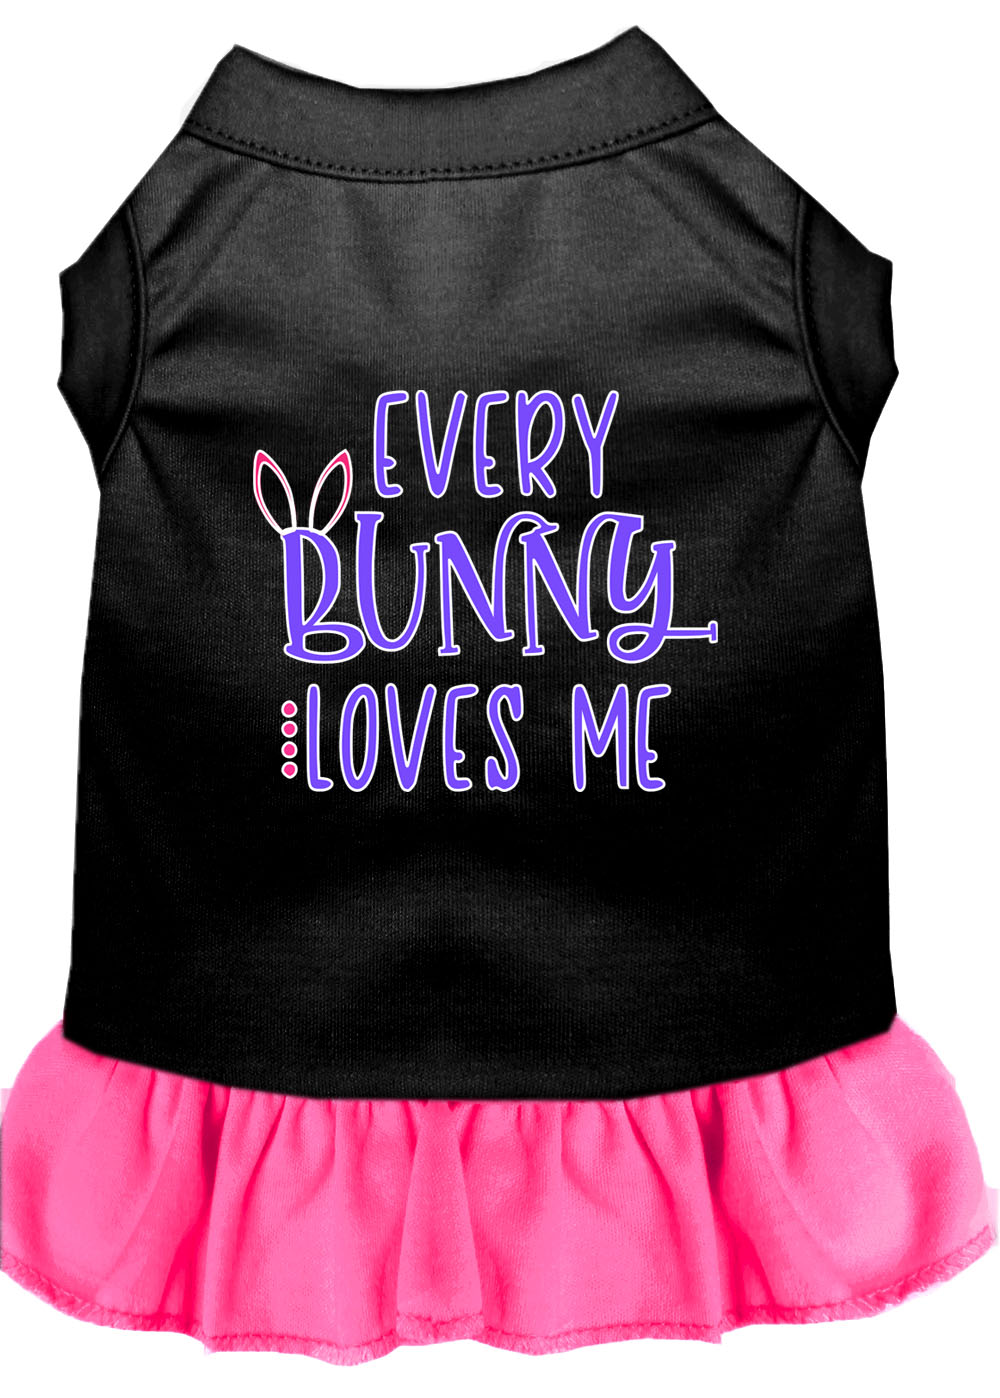 Every Bunny Loves me Screen Print Dog Dress Black with Bright Pink XL